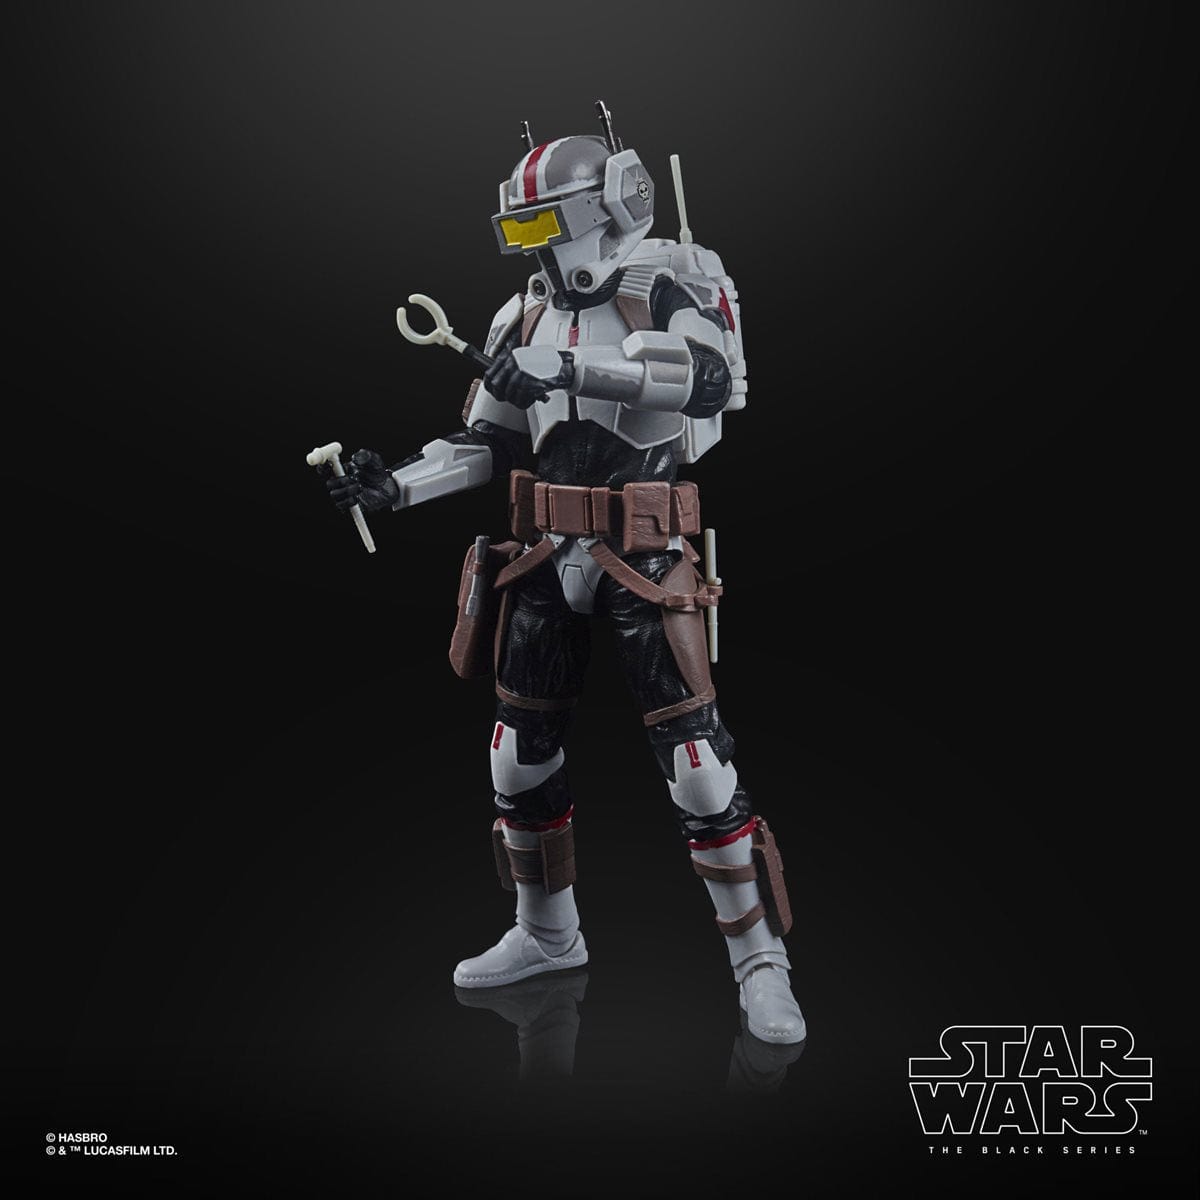 Star Wars The Black Series Tech Toy 6-Inch-Scale Star Wars: The Bad Batch Collectible Figure Media 5 of 10